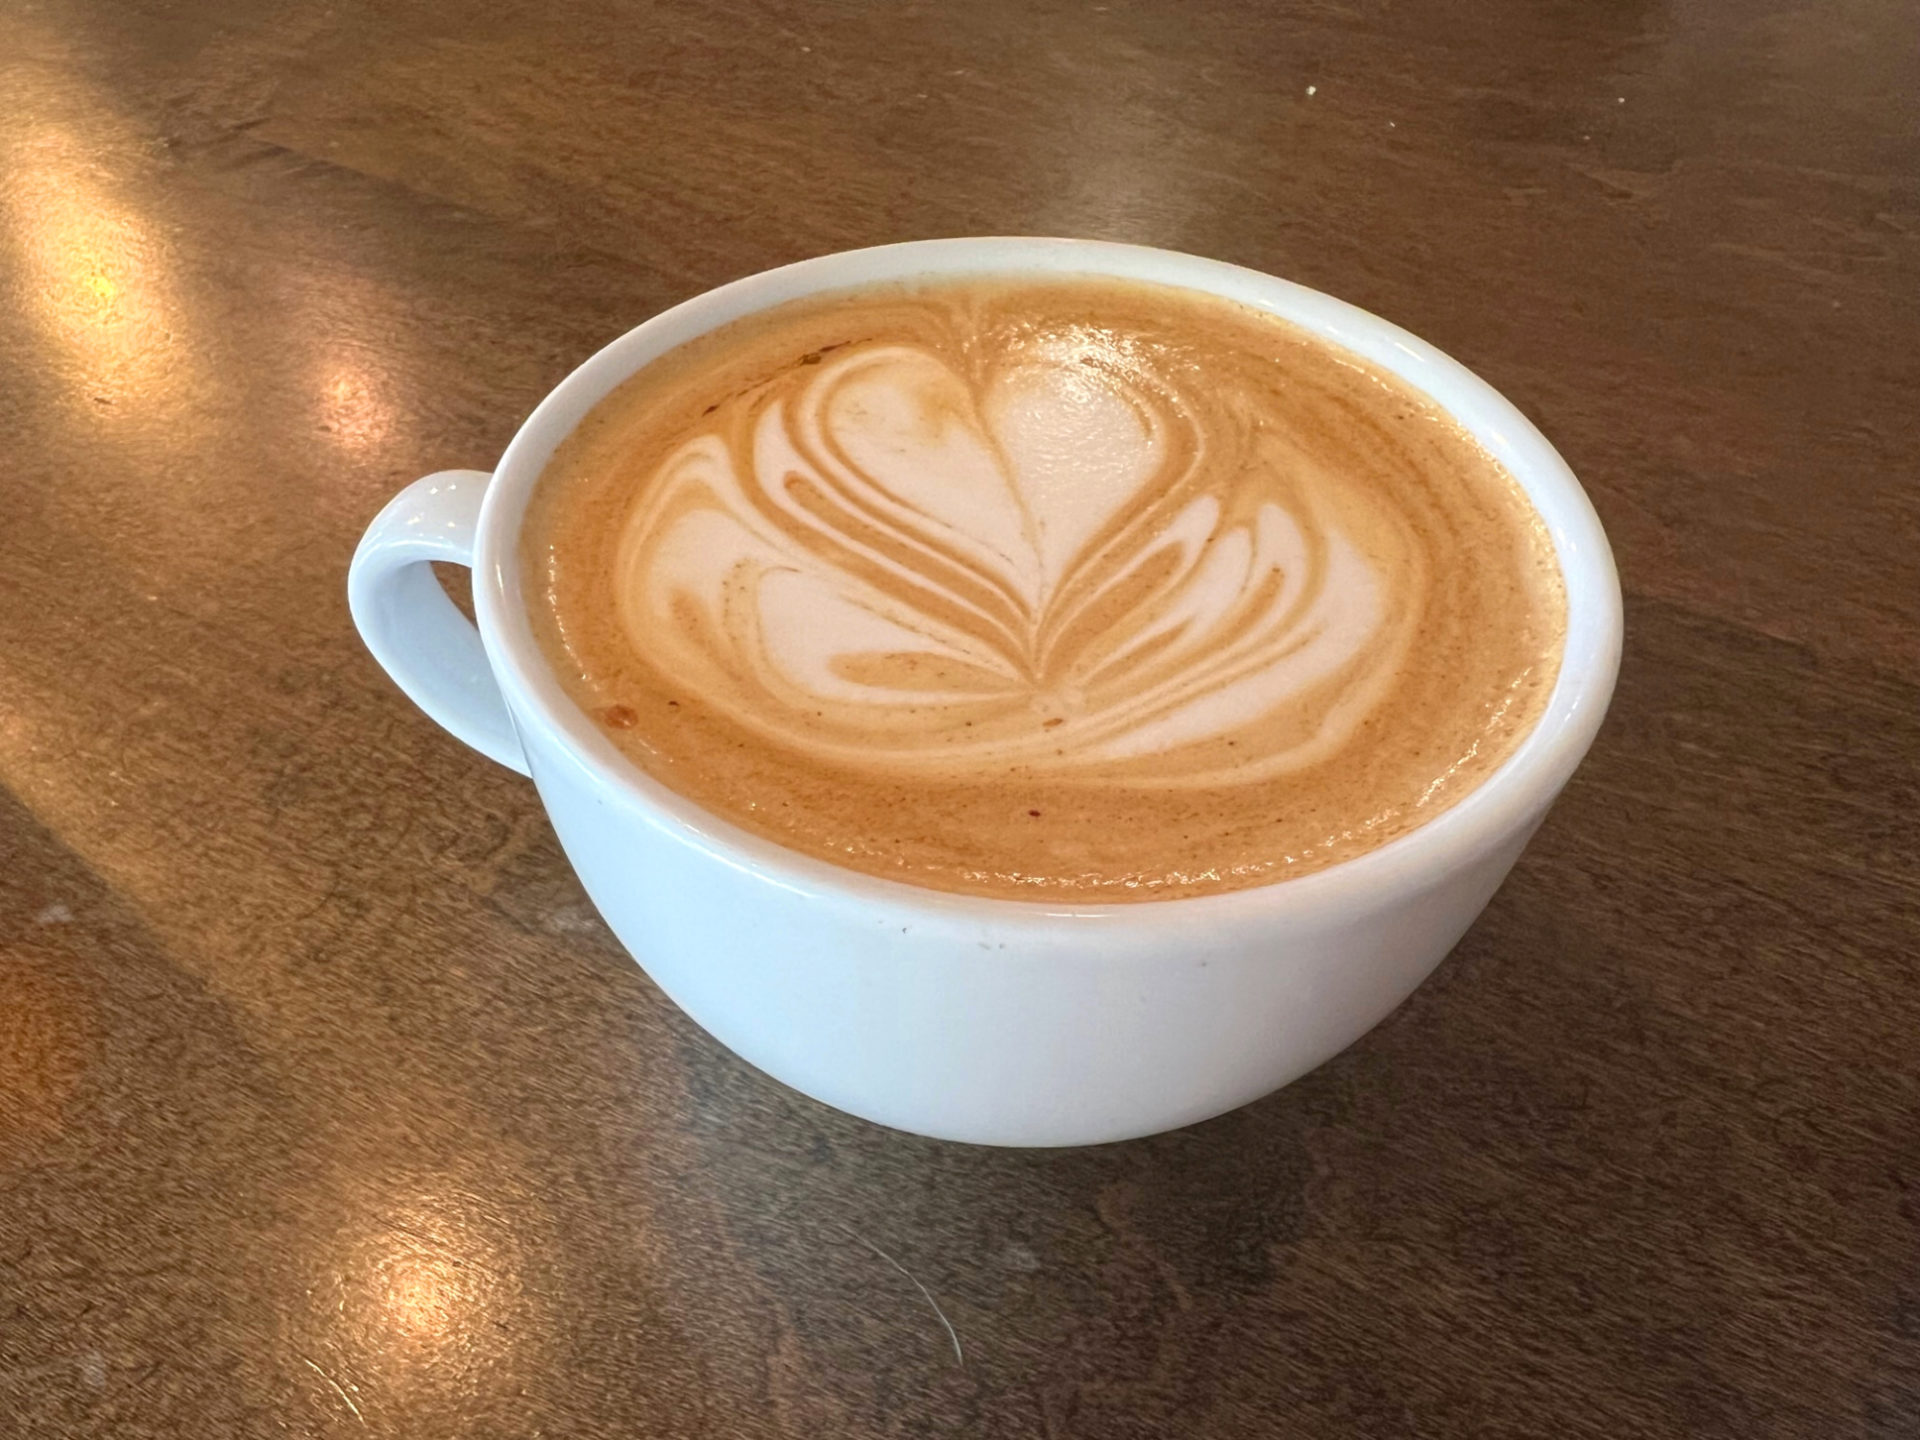 Sweet heat latte from Avionics for five things to eat or drink in Champaign-Urbana for June 2023. A light brown beverage in a white mug on a dark brown wood table. There is white latte art designed in the drink.